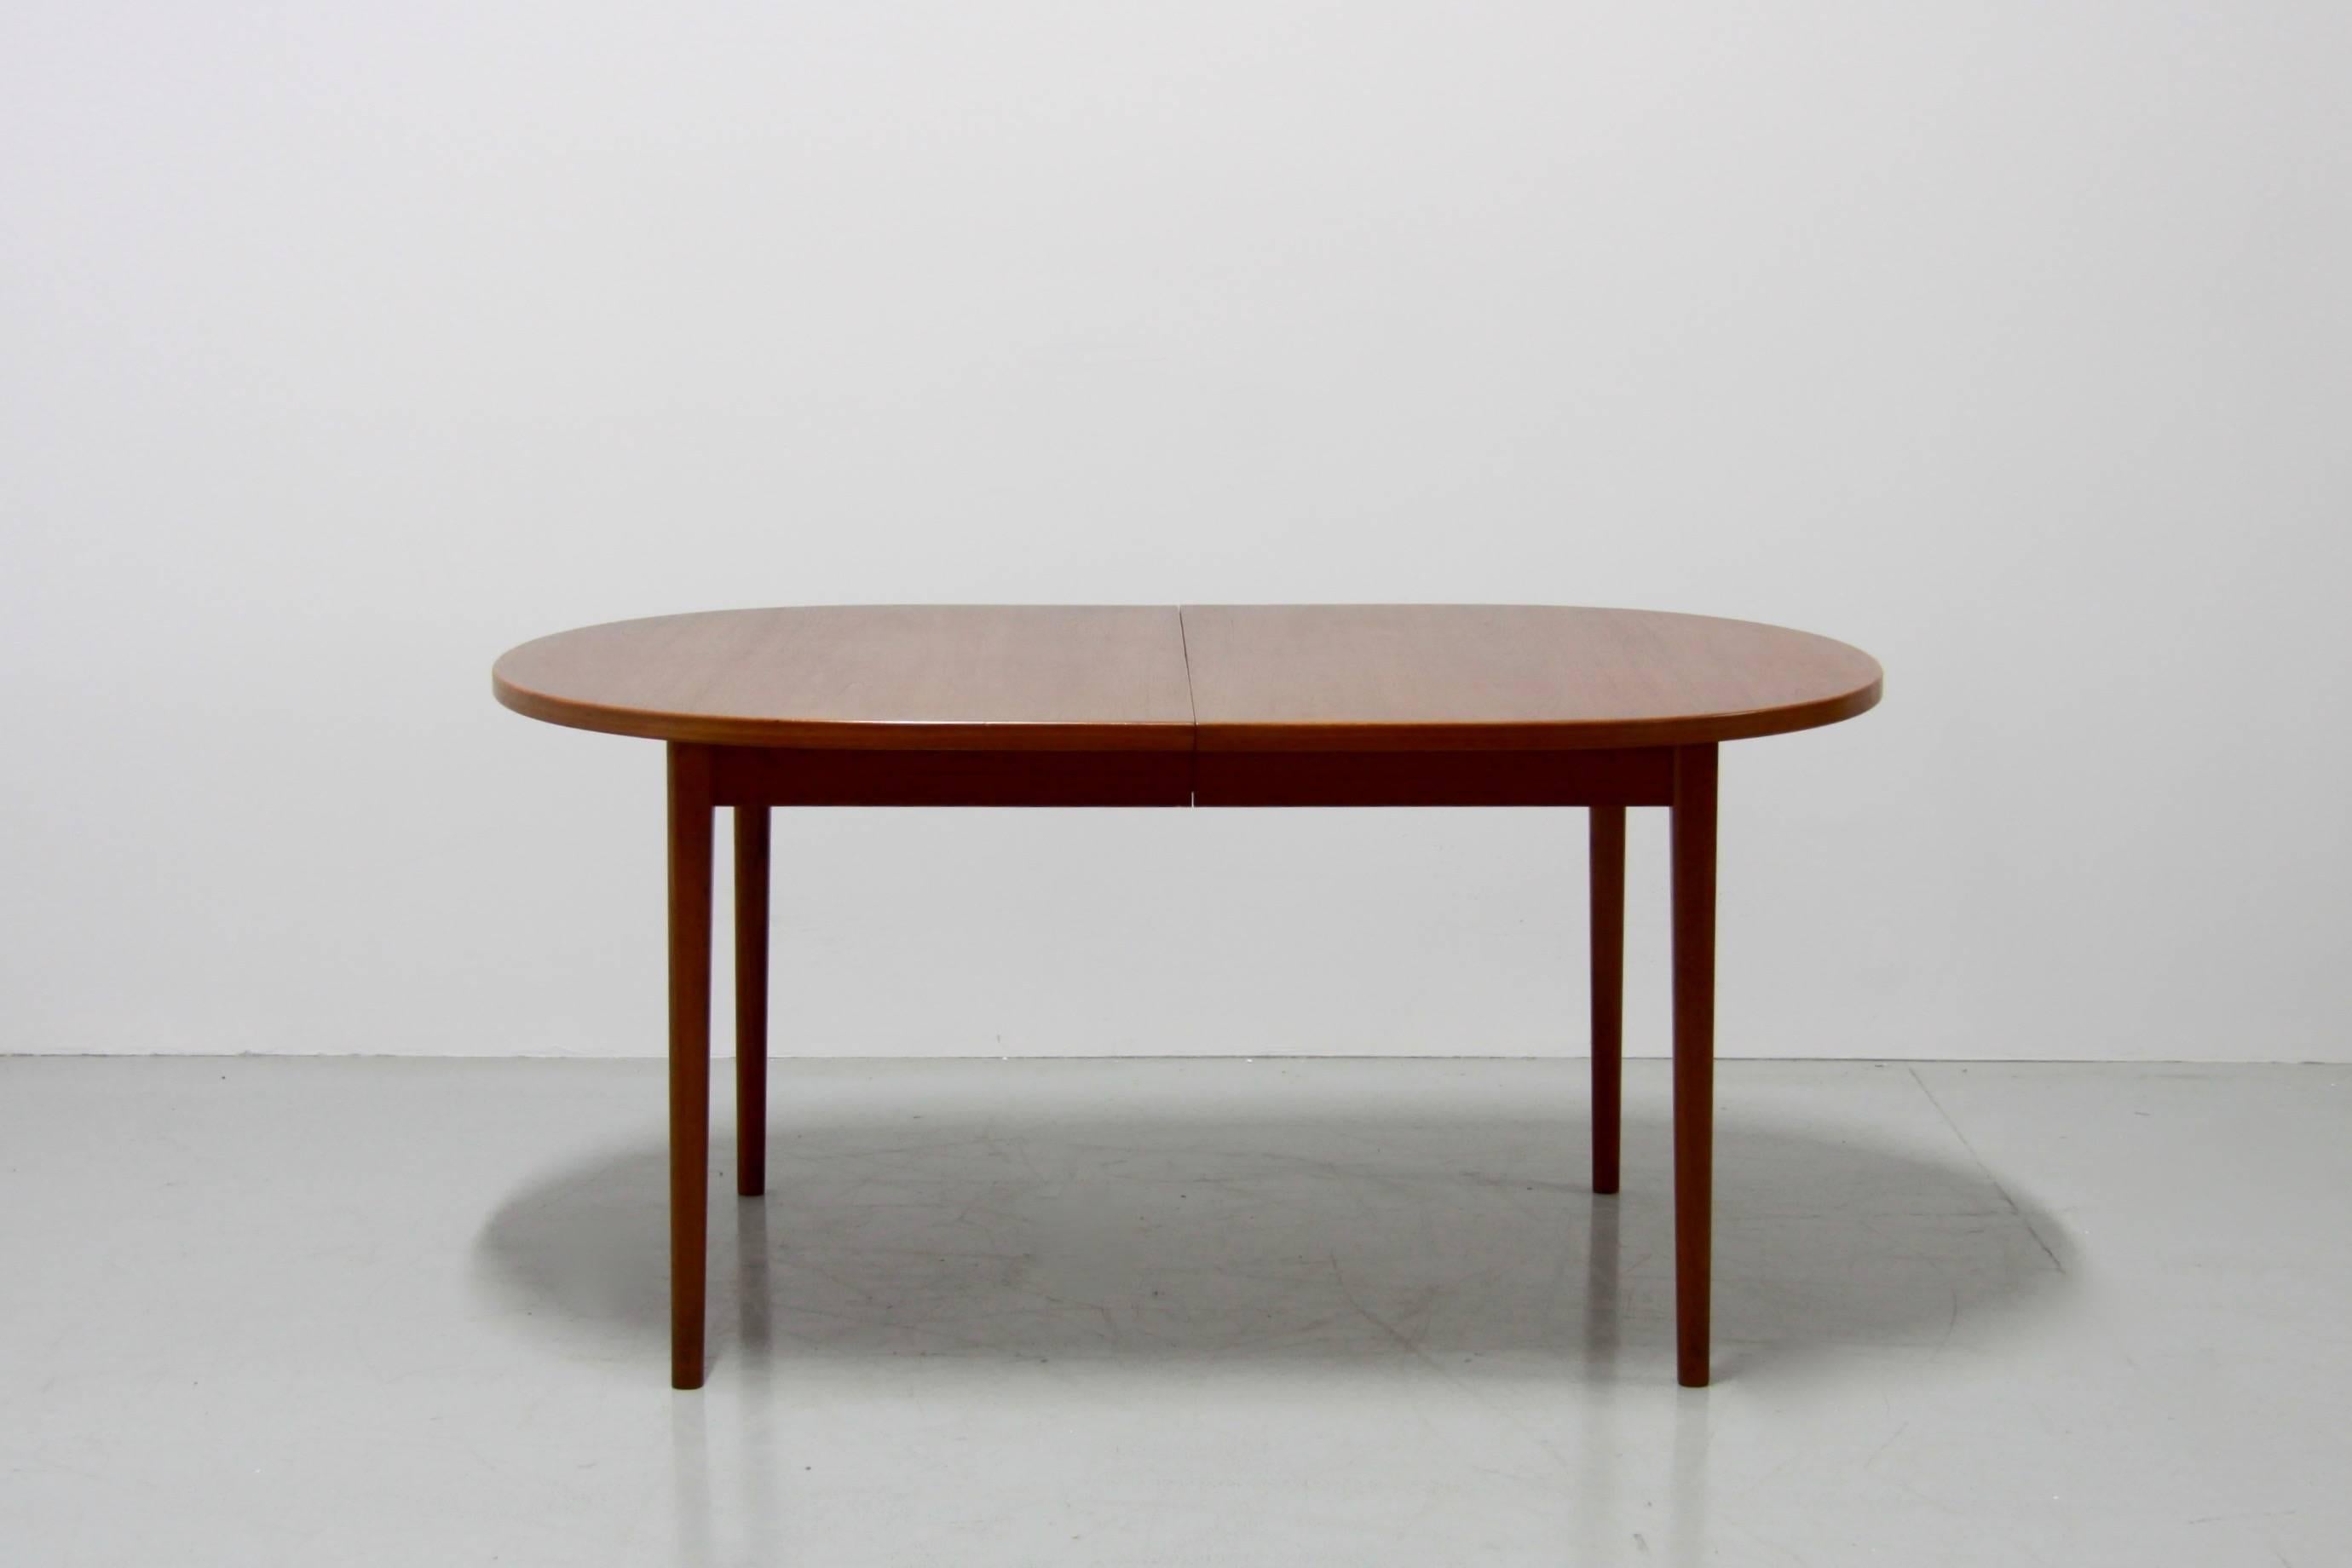 This table was created by Nils Jonsson for Troeds, Sweden in the 1960s. It is a minimalist design with clean lines. The table seats up to six dining chairs but with the addition of two generous extensions which are stored within the table and can be